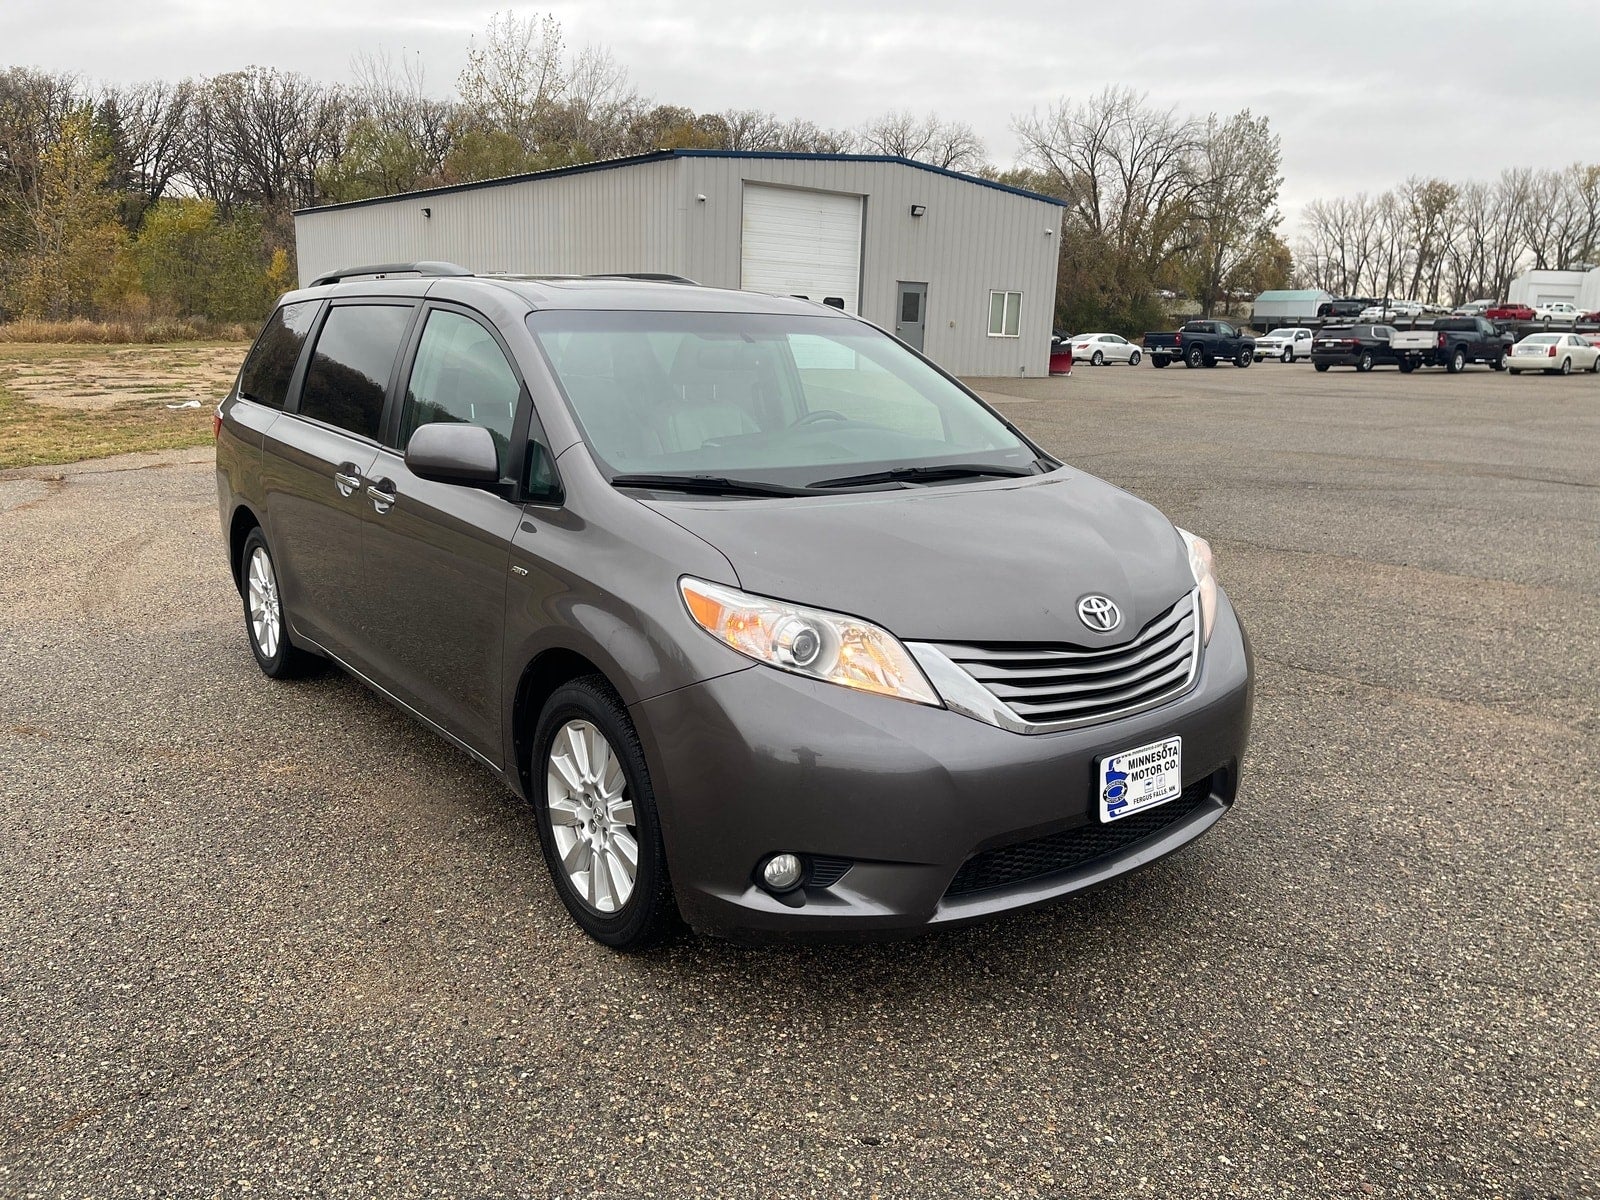 Used 2017 Toyota Sienna XLE with VIN 5TDDZ3DC6HS159935 for sale in Fergus Falls, Minnesota